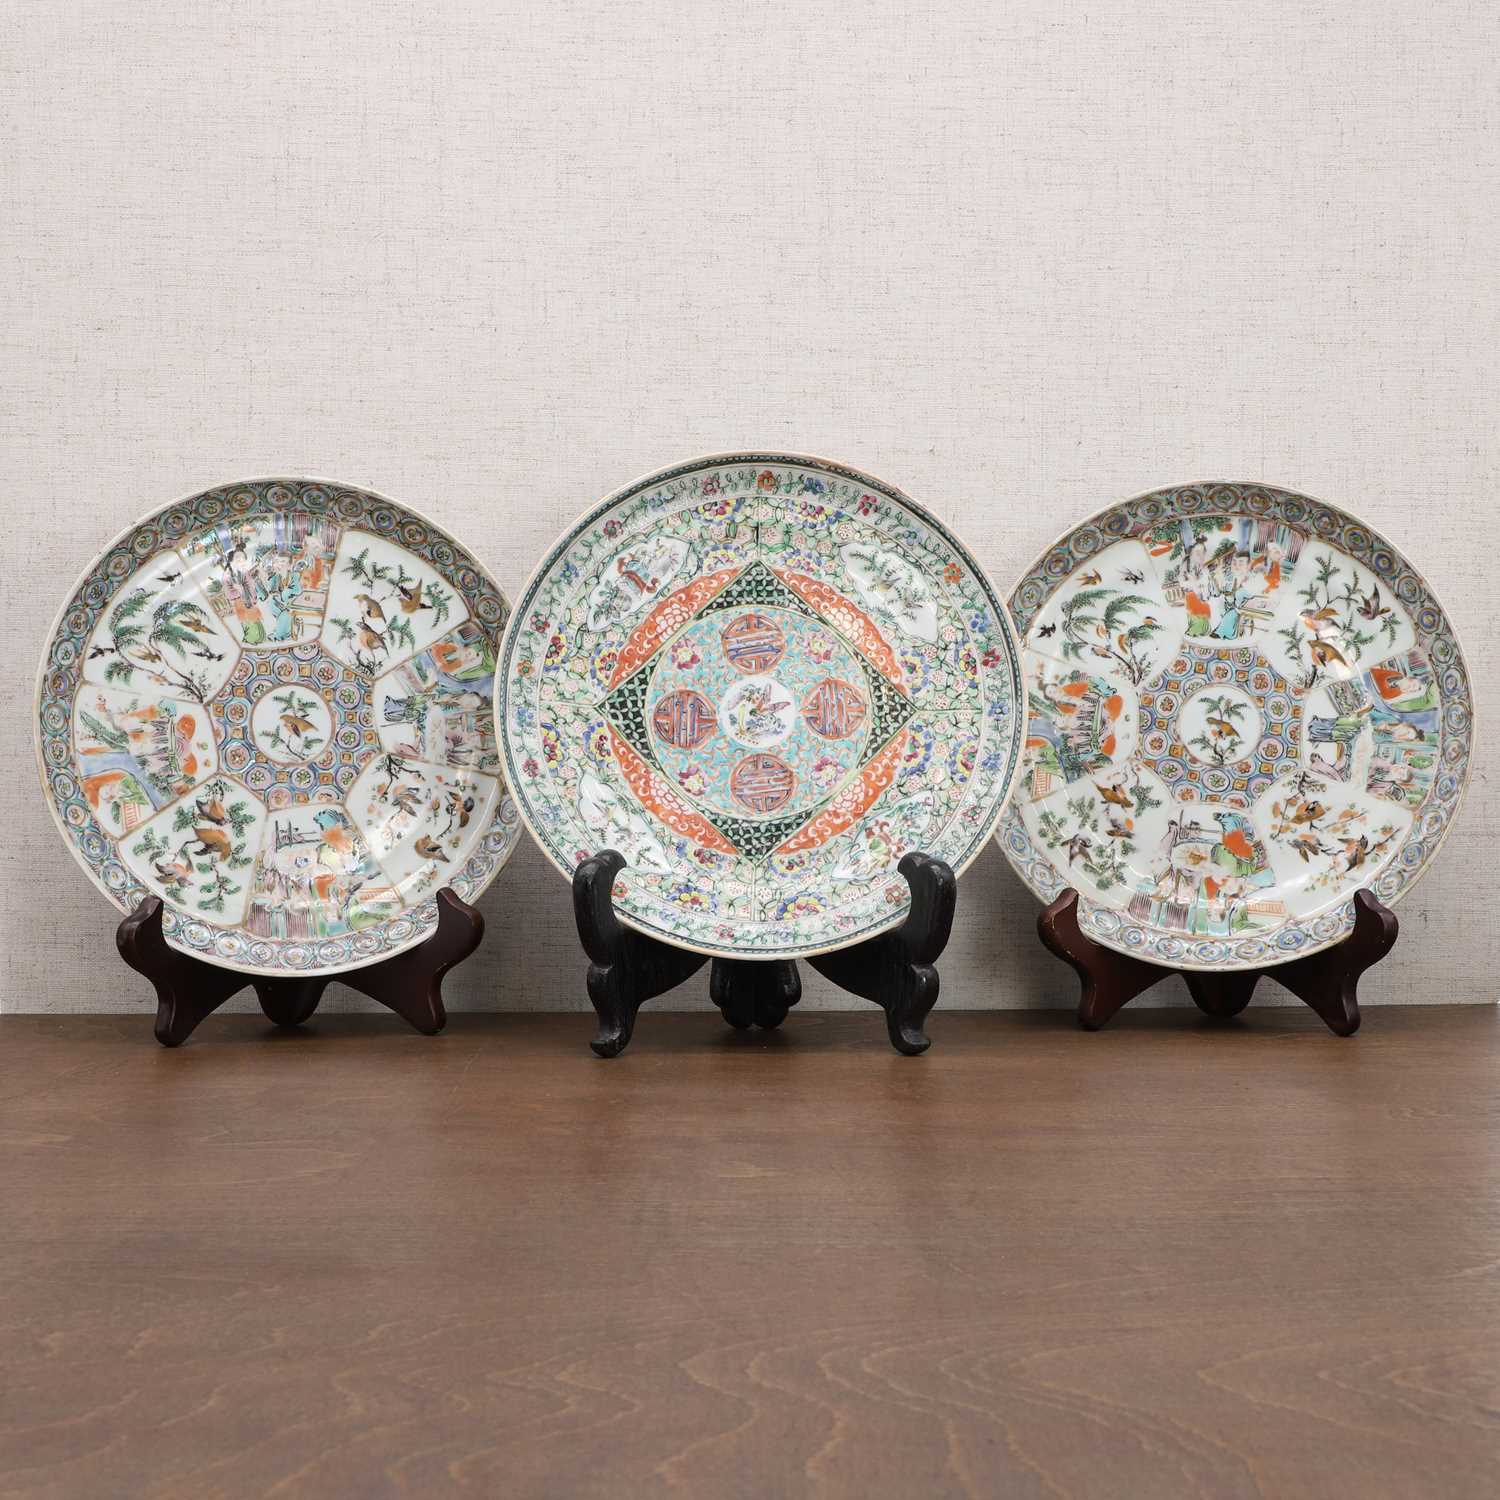 Three Chinese famille rose plates,